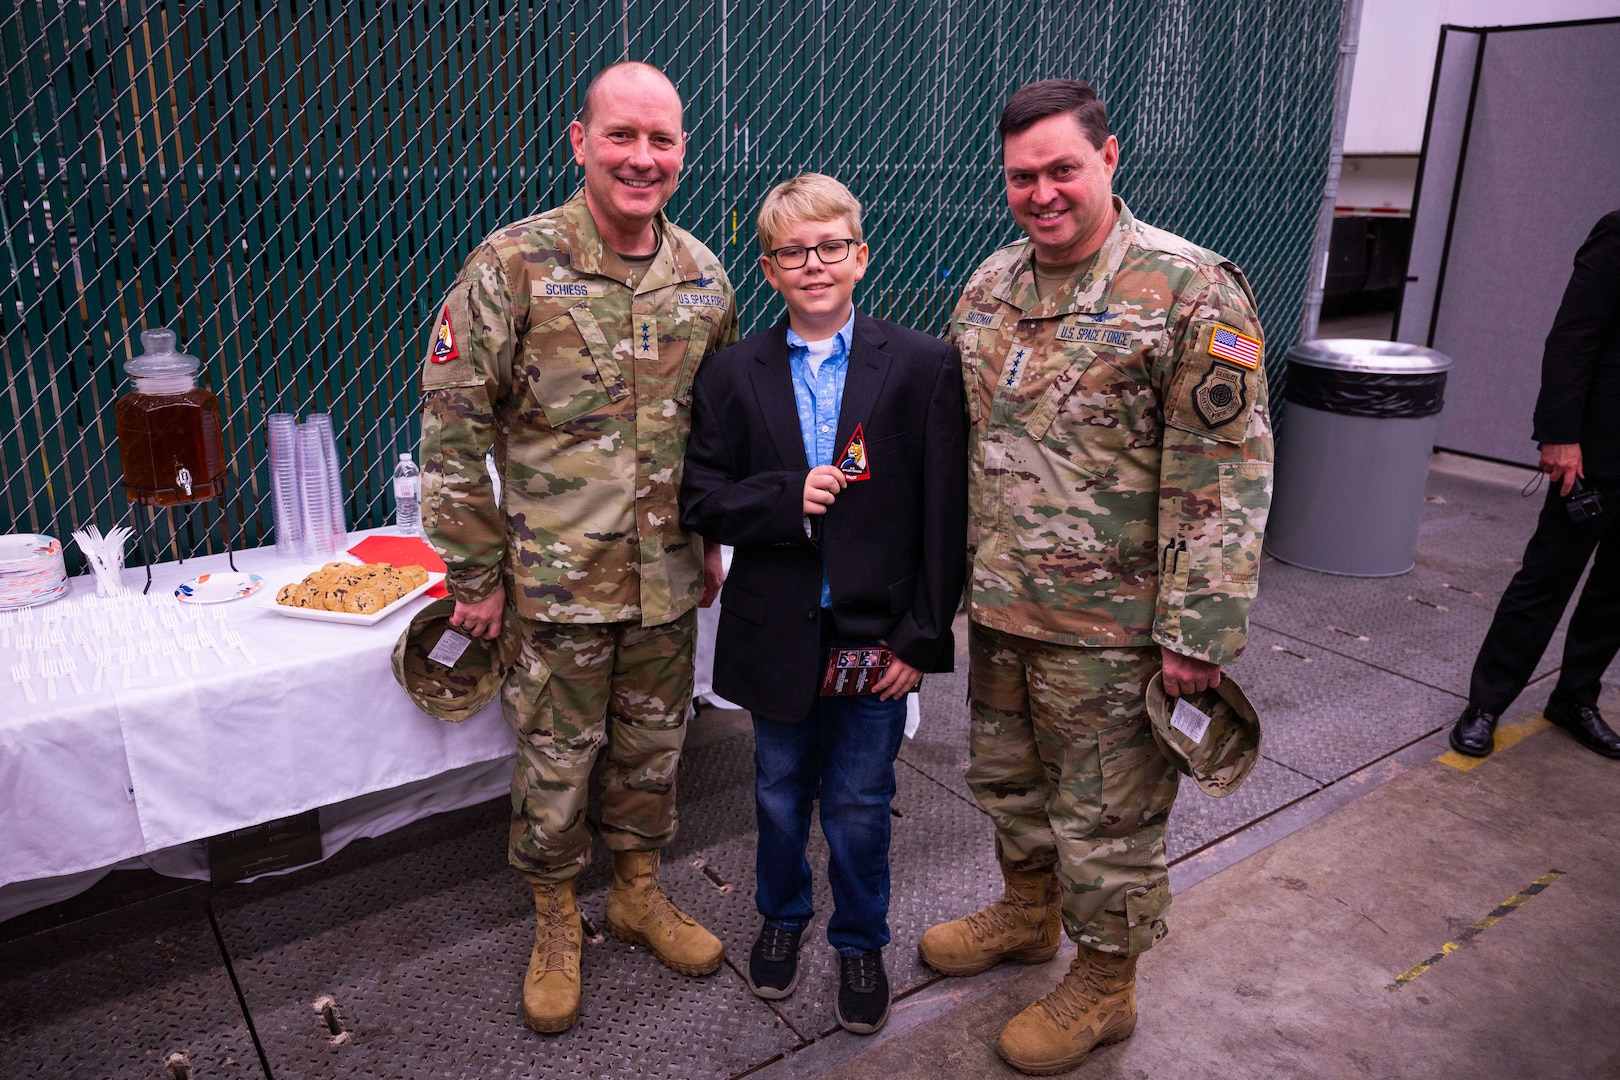 U.S. Space Force Lt. Gen. Douglas A. Schiess, S4S commander and the Combined Joint Force Space Component Commander, left, and U.S. Space Forces Chief of Space Operations Gen. B. Chance Saltzman, right, congratulate 12-year-old Asher L. Paulson on his contributions to the design elements of the S4S emblem after the S4S activation ceremony at Vandenberg Space Force Base, Calif., Jan. 31, 2024. Asher, son of U.S. Air Force Maj. William Paulson, S4S Deputy Staff Judge Advocate, is credited with the original creation of the tiger used in the S4S emblem and integral to the design being ready by activation. (U.S. Space Force photo by Tech. Sgt. Luke Kitterman)